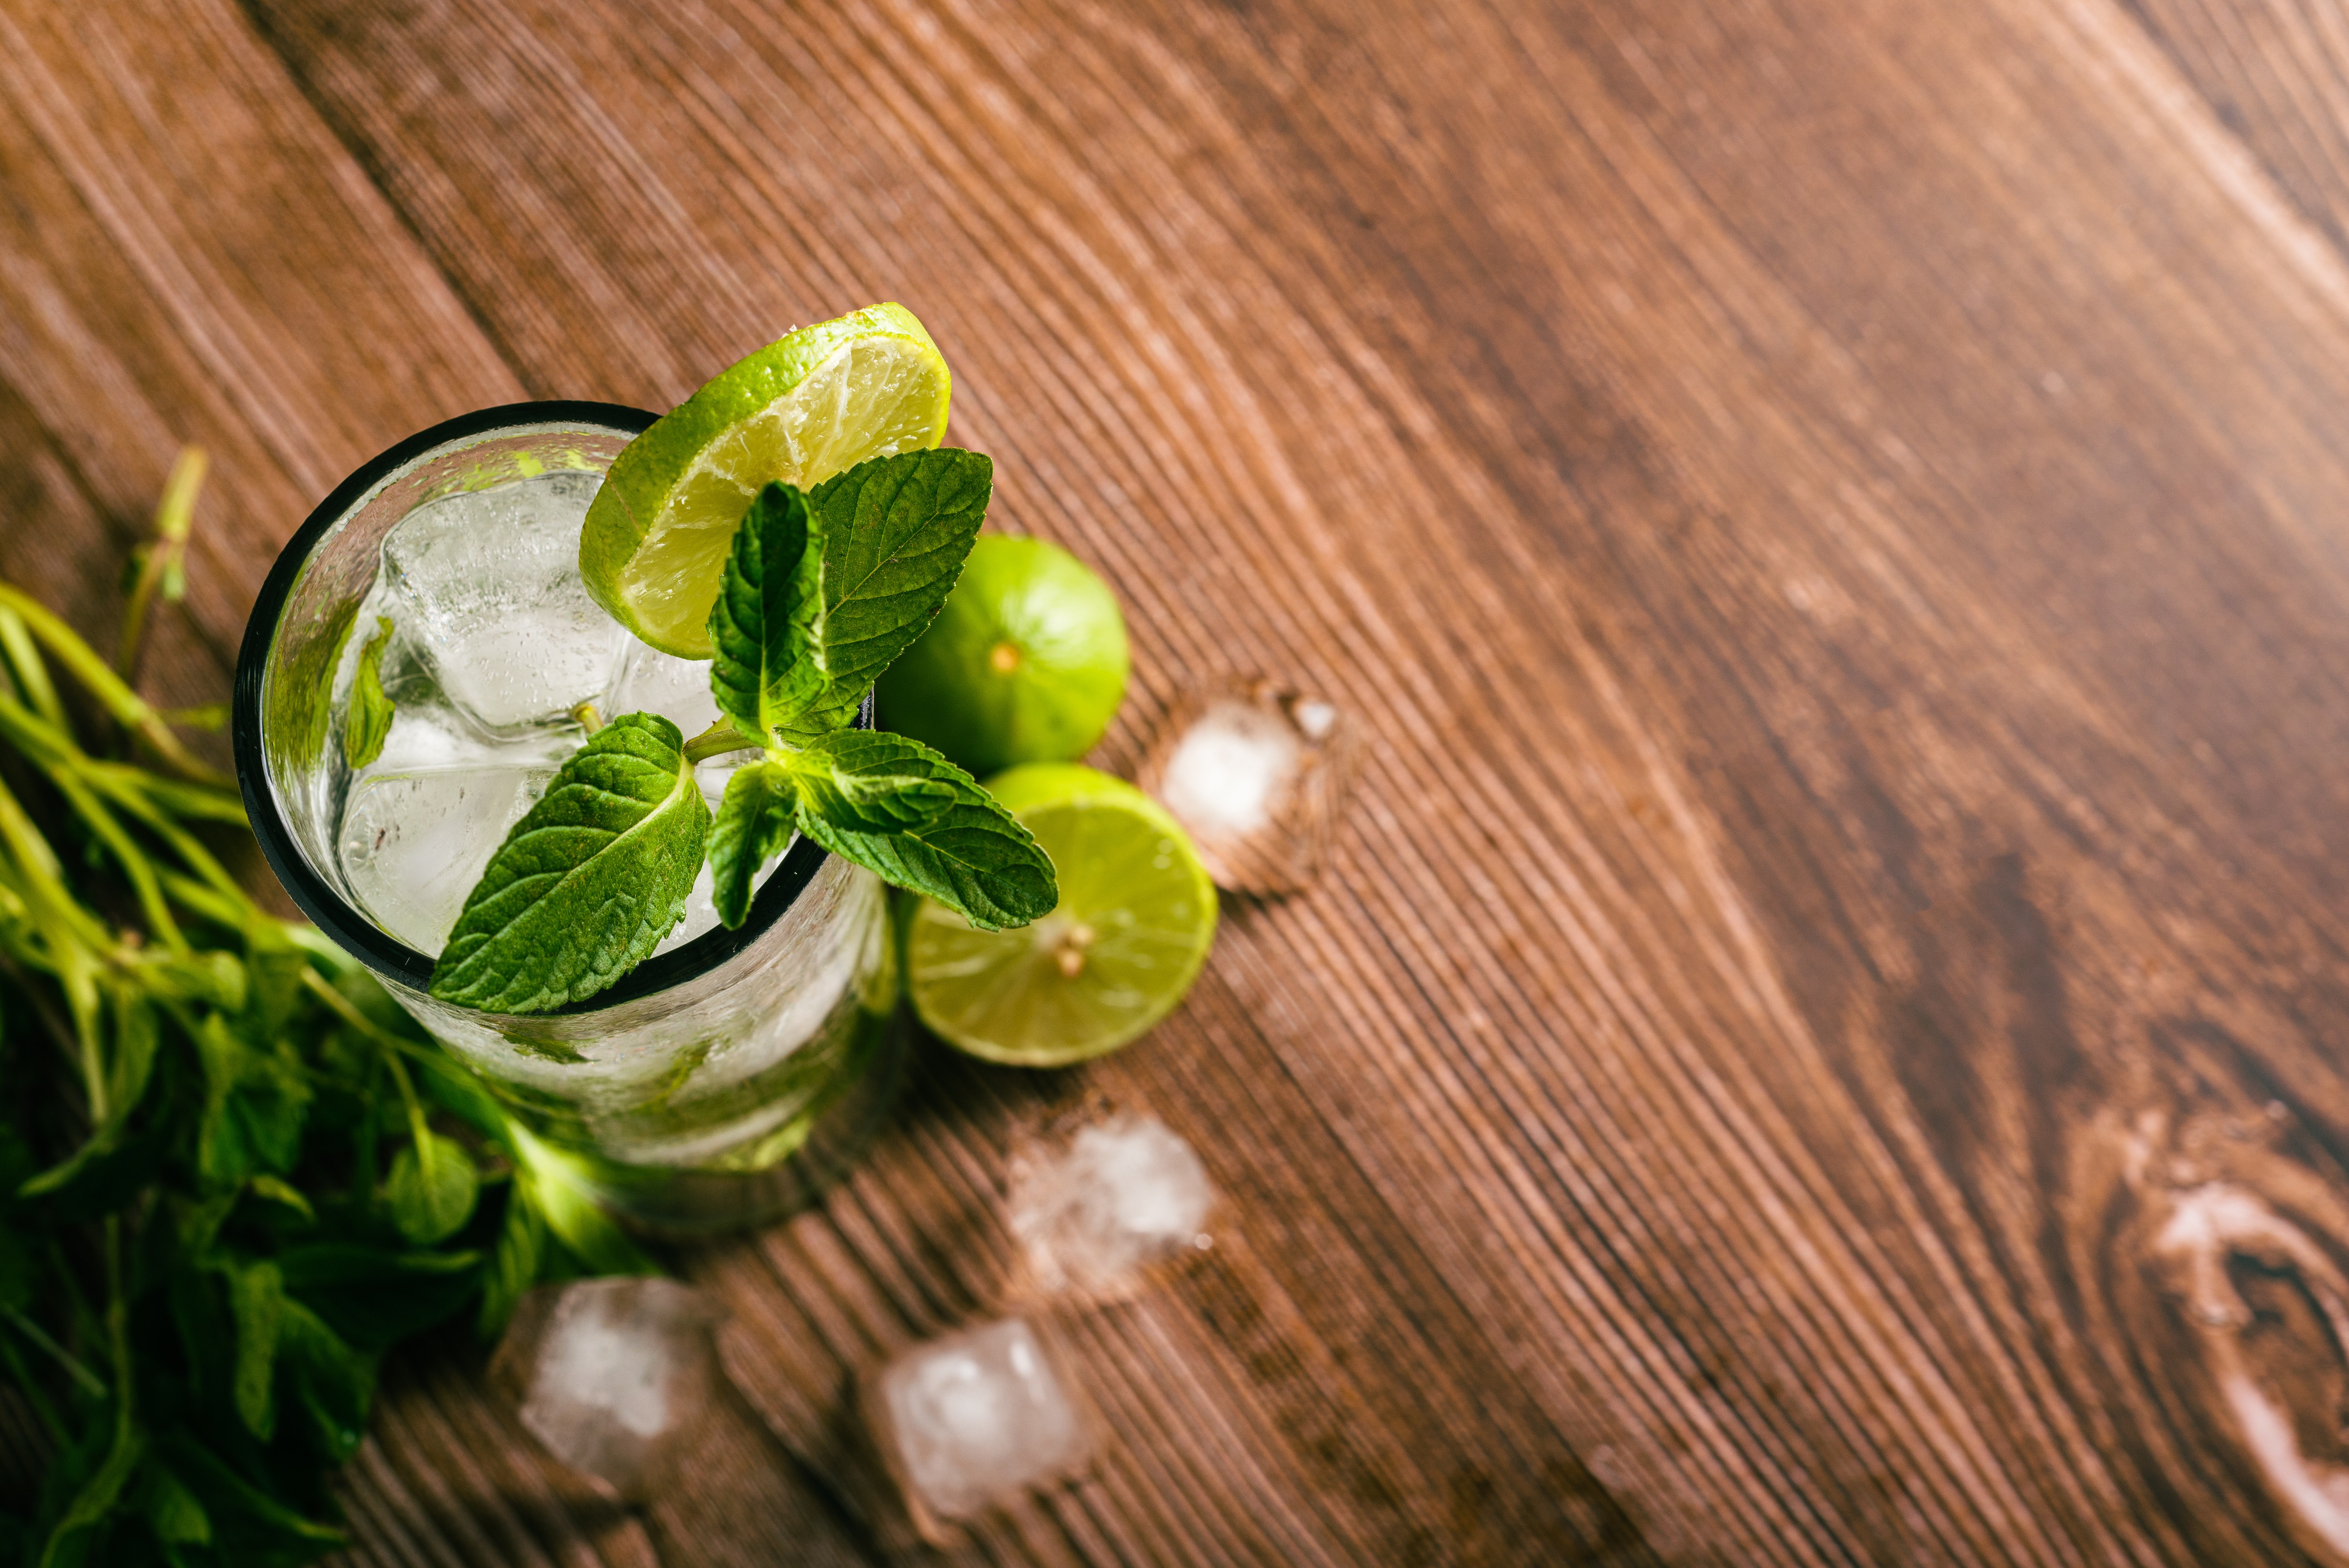 Mojito: Sip into summer bliss with this timeless classic